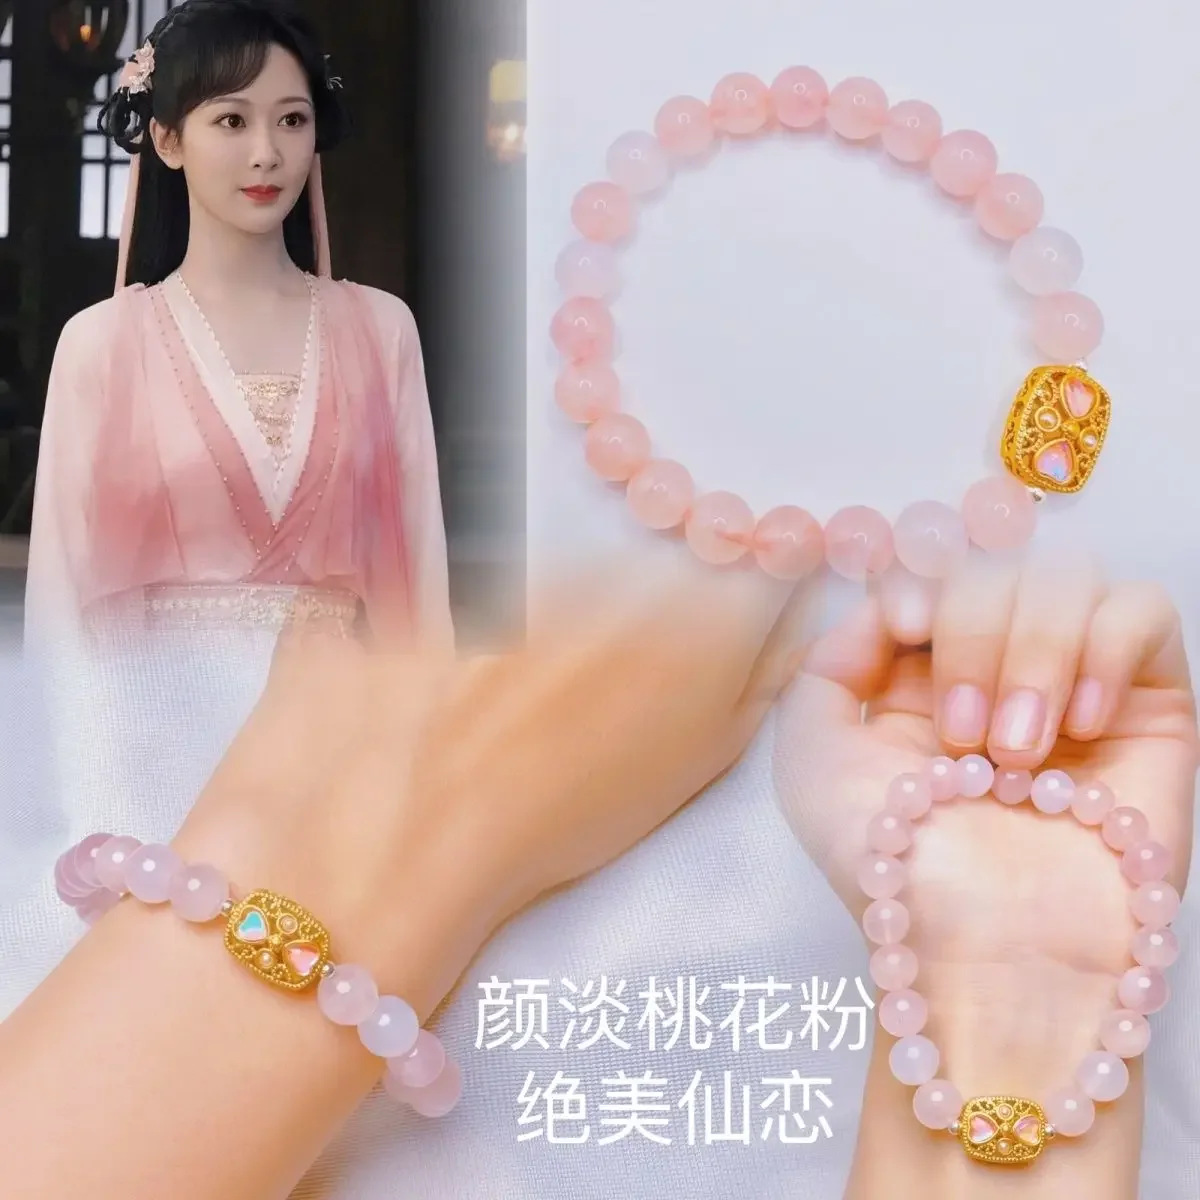 

Natural Pink Romantic Agate Bracelet Princess Kawaii Girl Cut Born Lady HandString Pearlescent Cherry Blossom Light Color Gifts